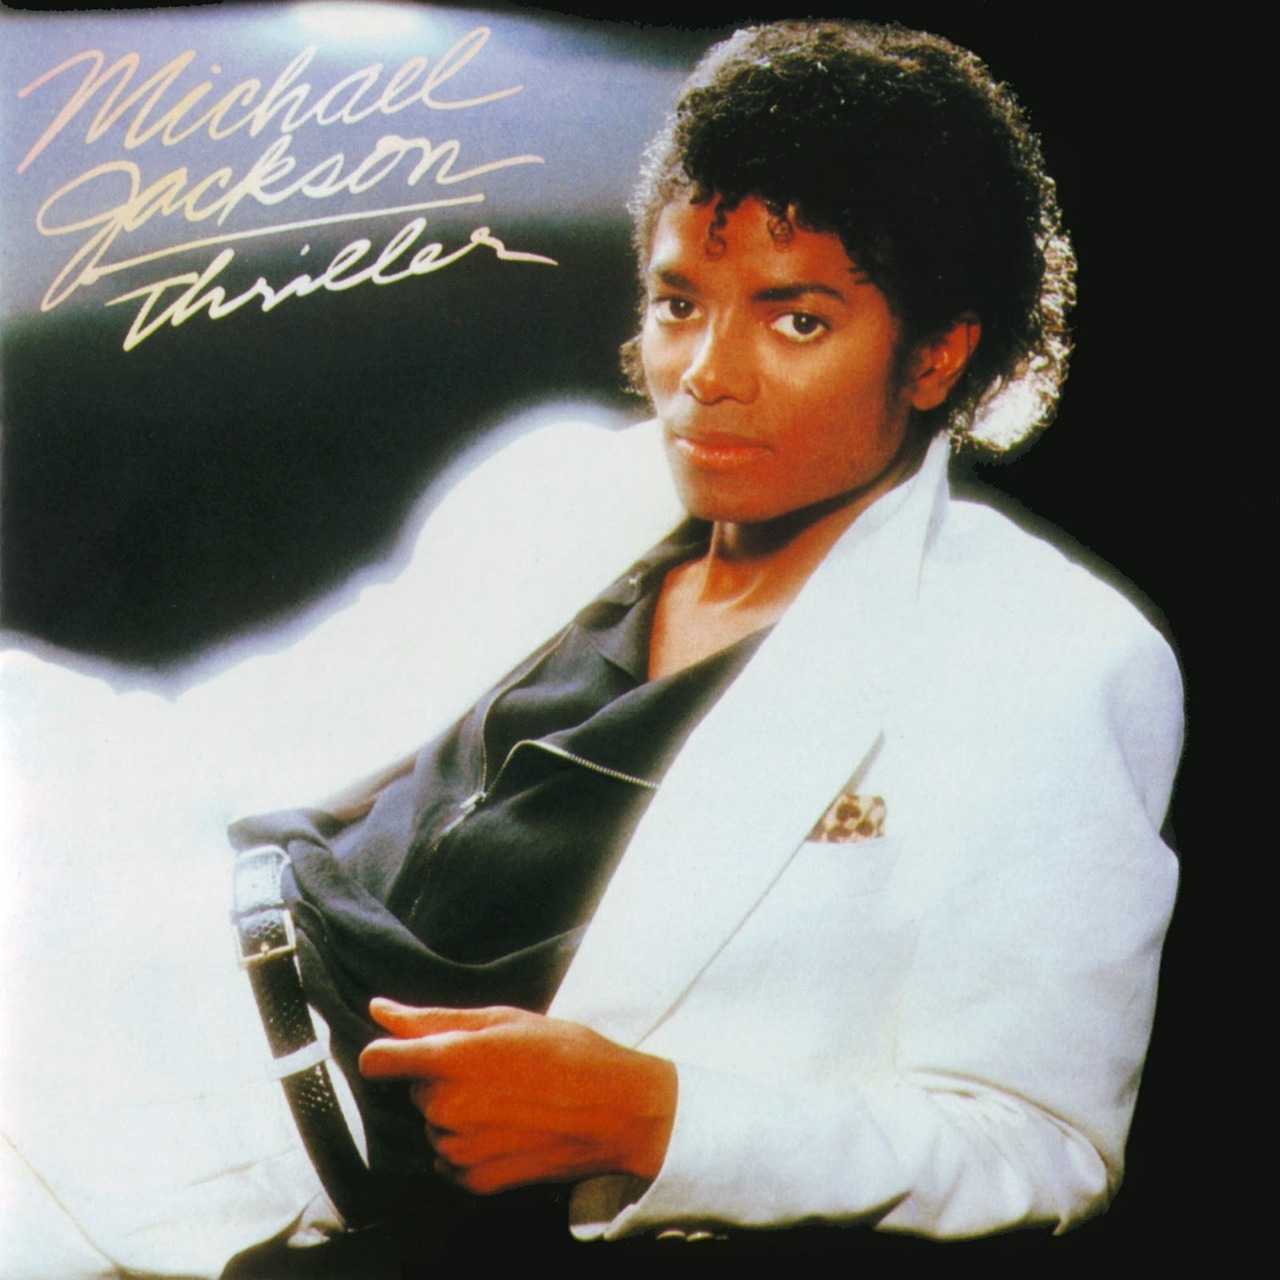 BACK IN THE DAY |11/30/82| Michael Jackson released his sixth album, Thriller, on